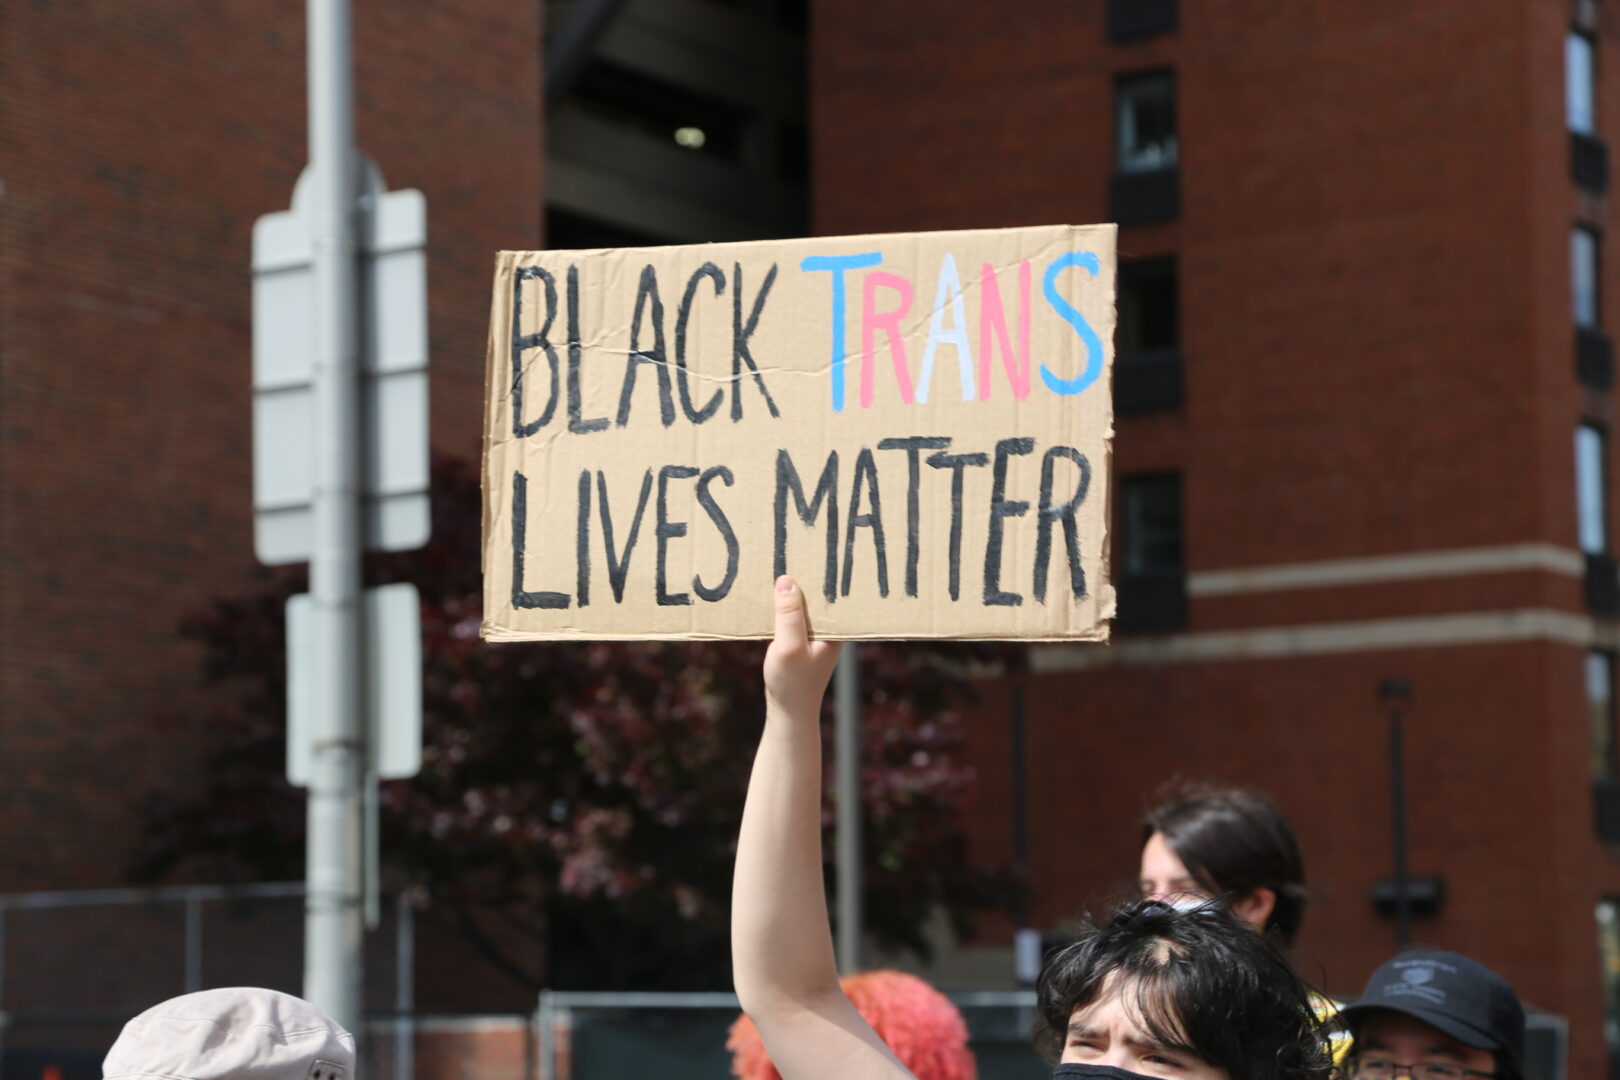 A sign in support of Black trans lives during a demonstration on Sunday, May 2, 2021.
